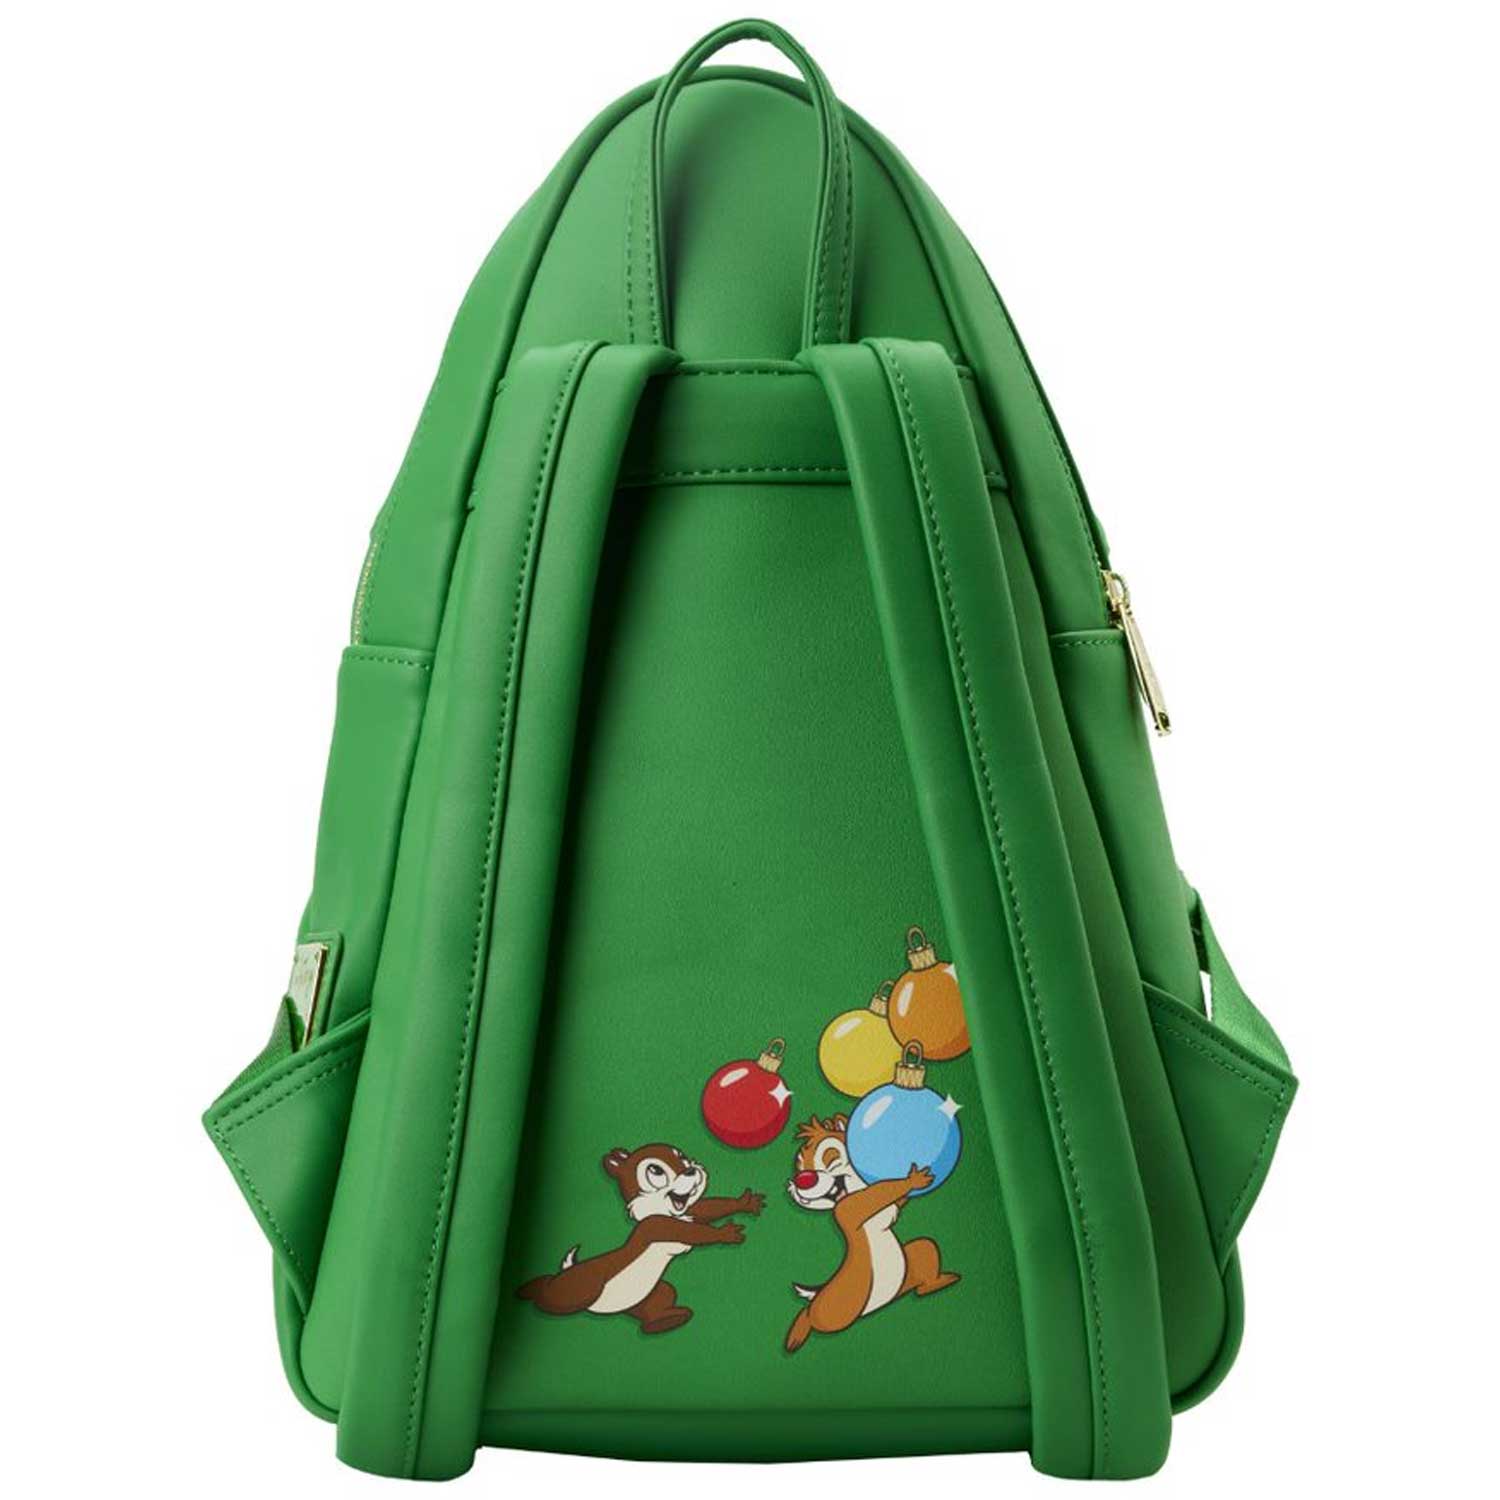 Loungefly x Disney Chip and Dale Figural Christmas Tree Mini Backpack - GeekCore